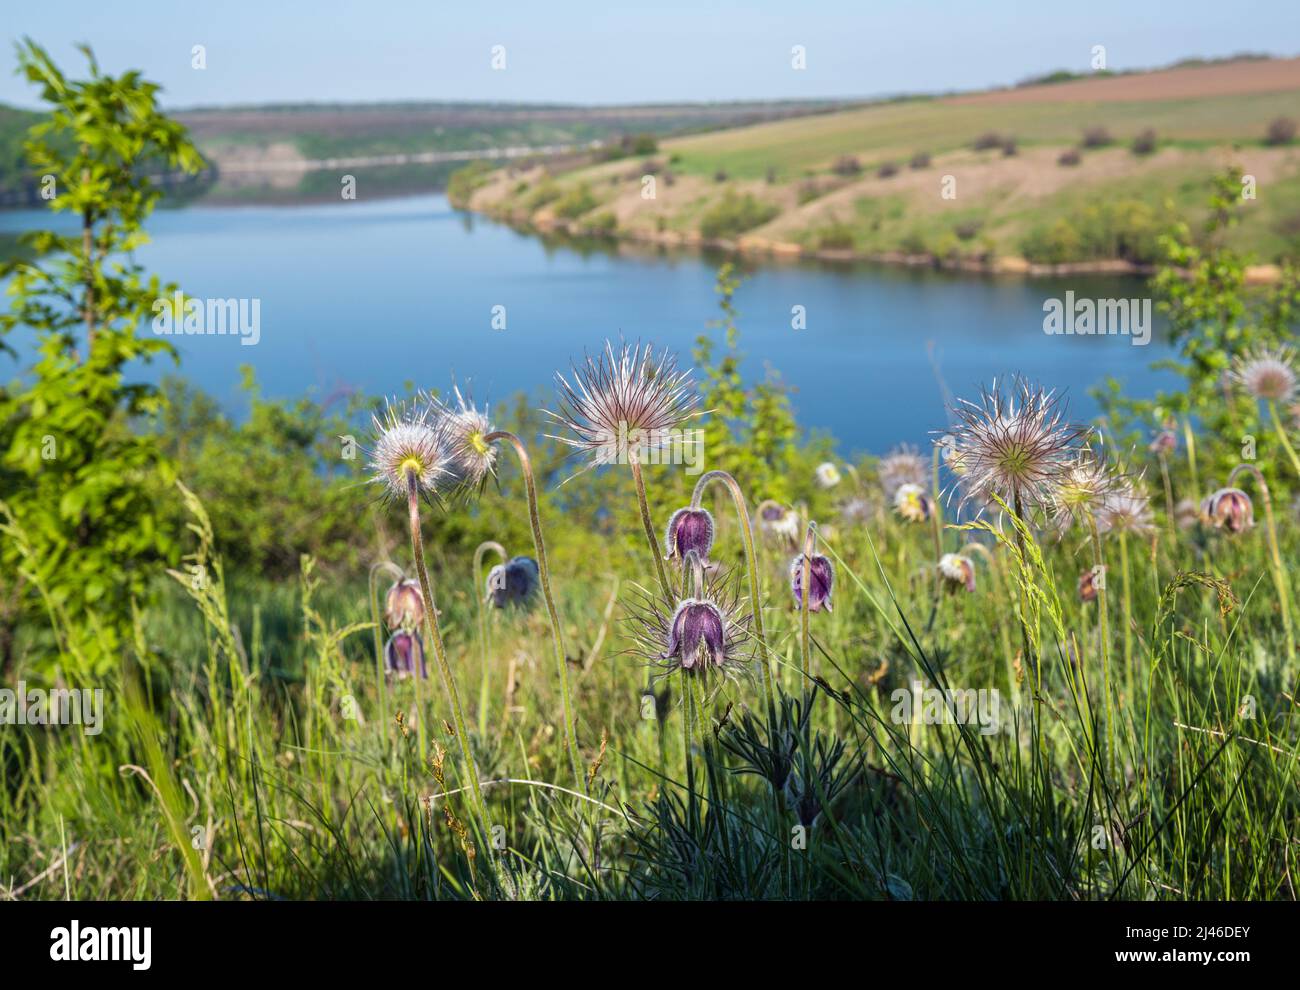 Amazing spring view on the Dnister River Canyon with Pulsatilla patens or Prairie Crocus or Pasque flower flowers. This place named Shyshkovi Gorby, Stock Photo